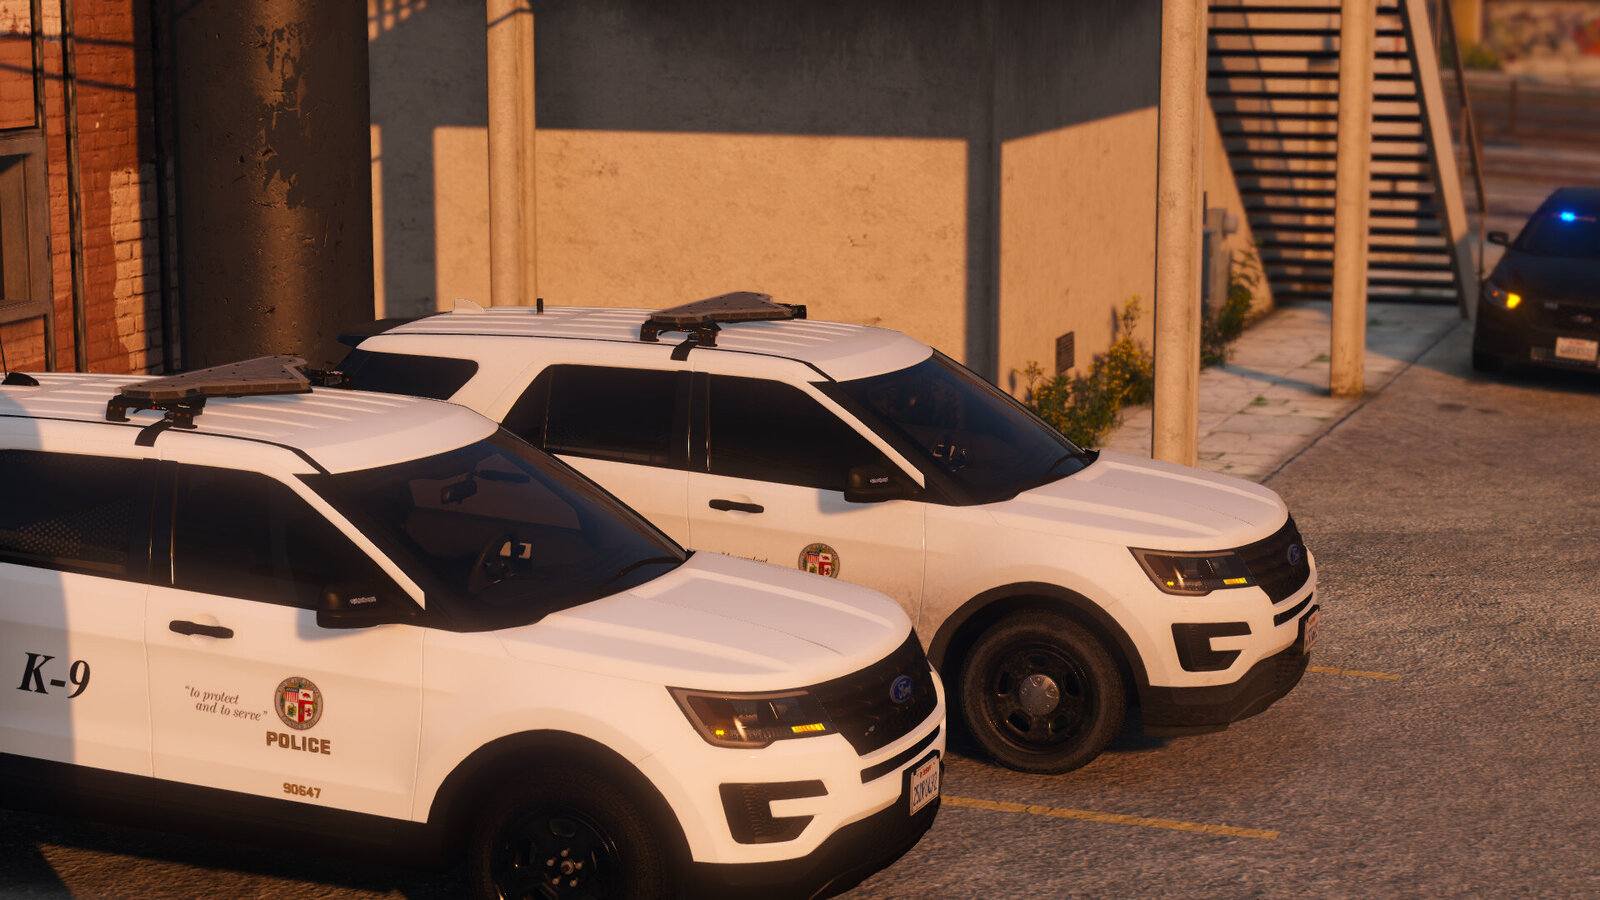 GTA 5 Mods: Police Mods for Grand Theft Auto V by LSPDFR